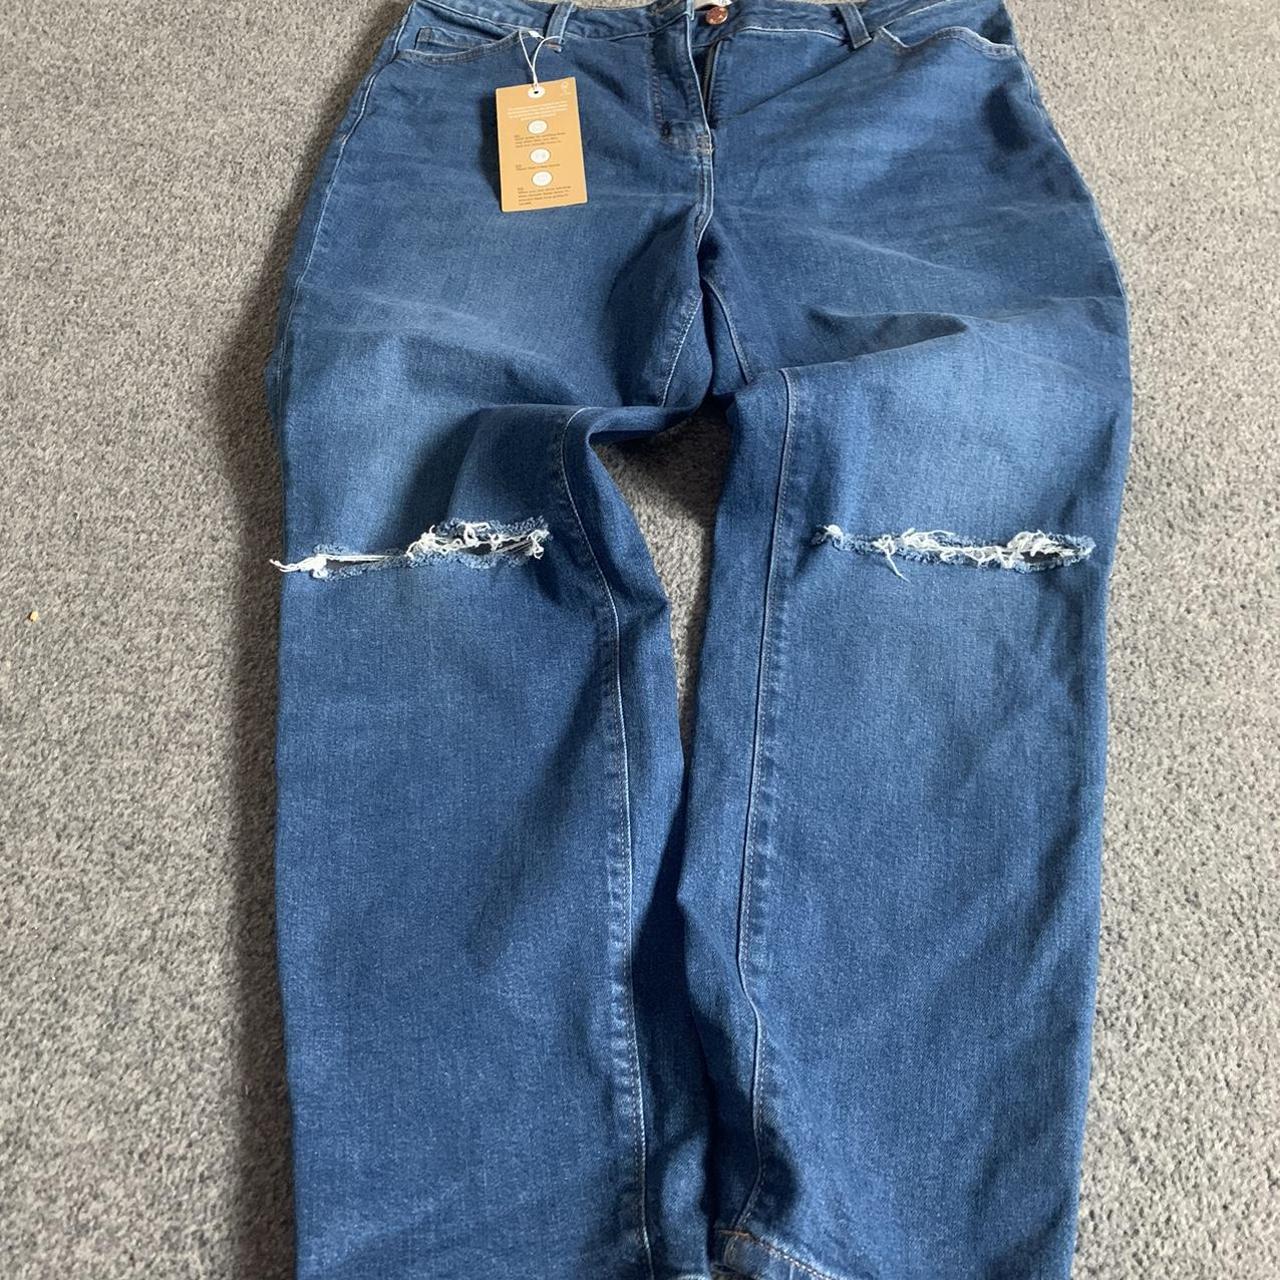 BNWT Marks and Spencer Cigarette high rise jeans.... - Depop